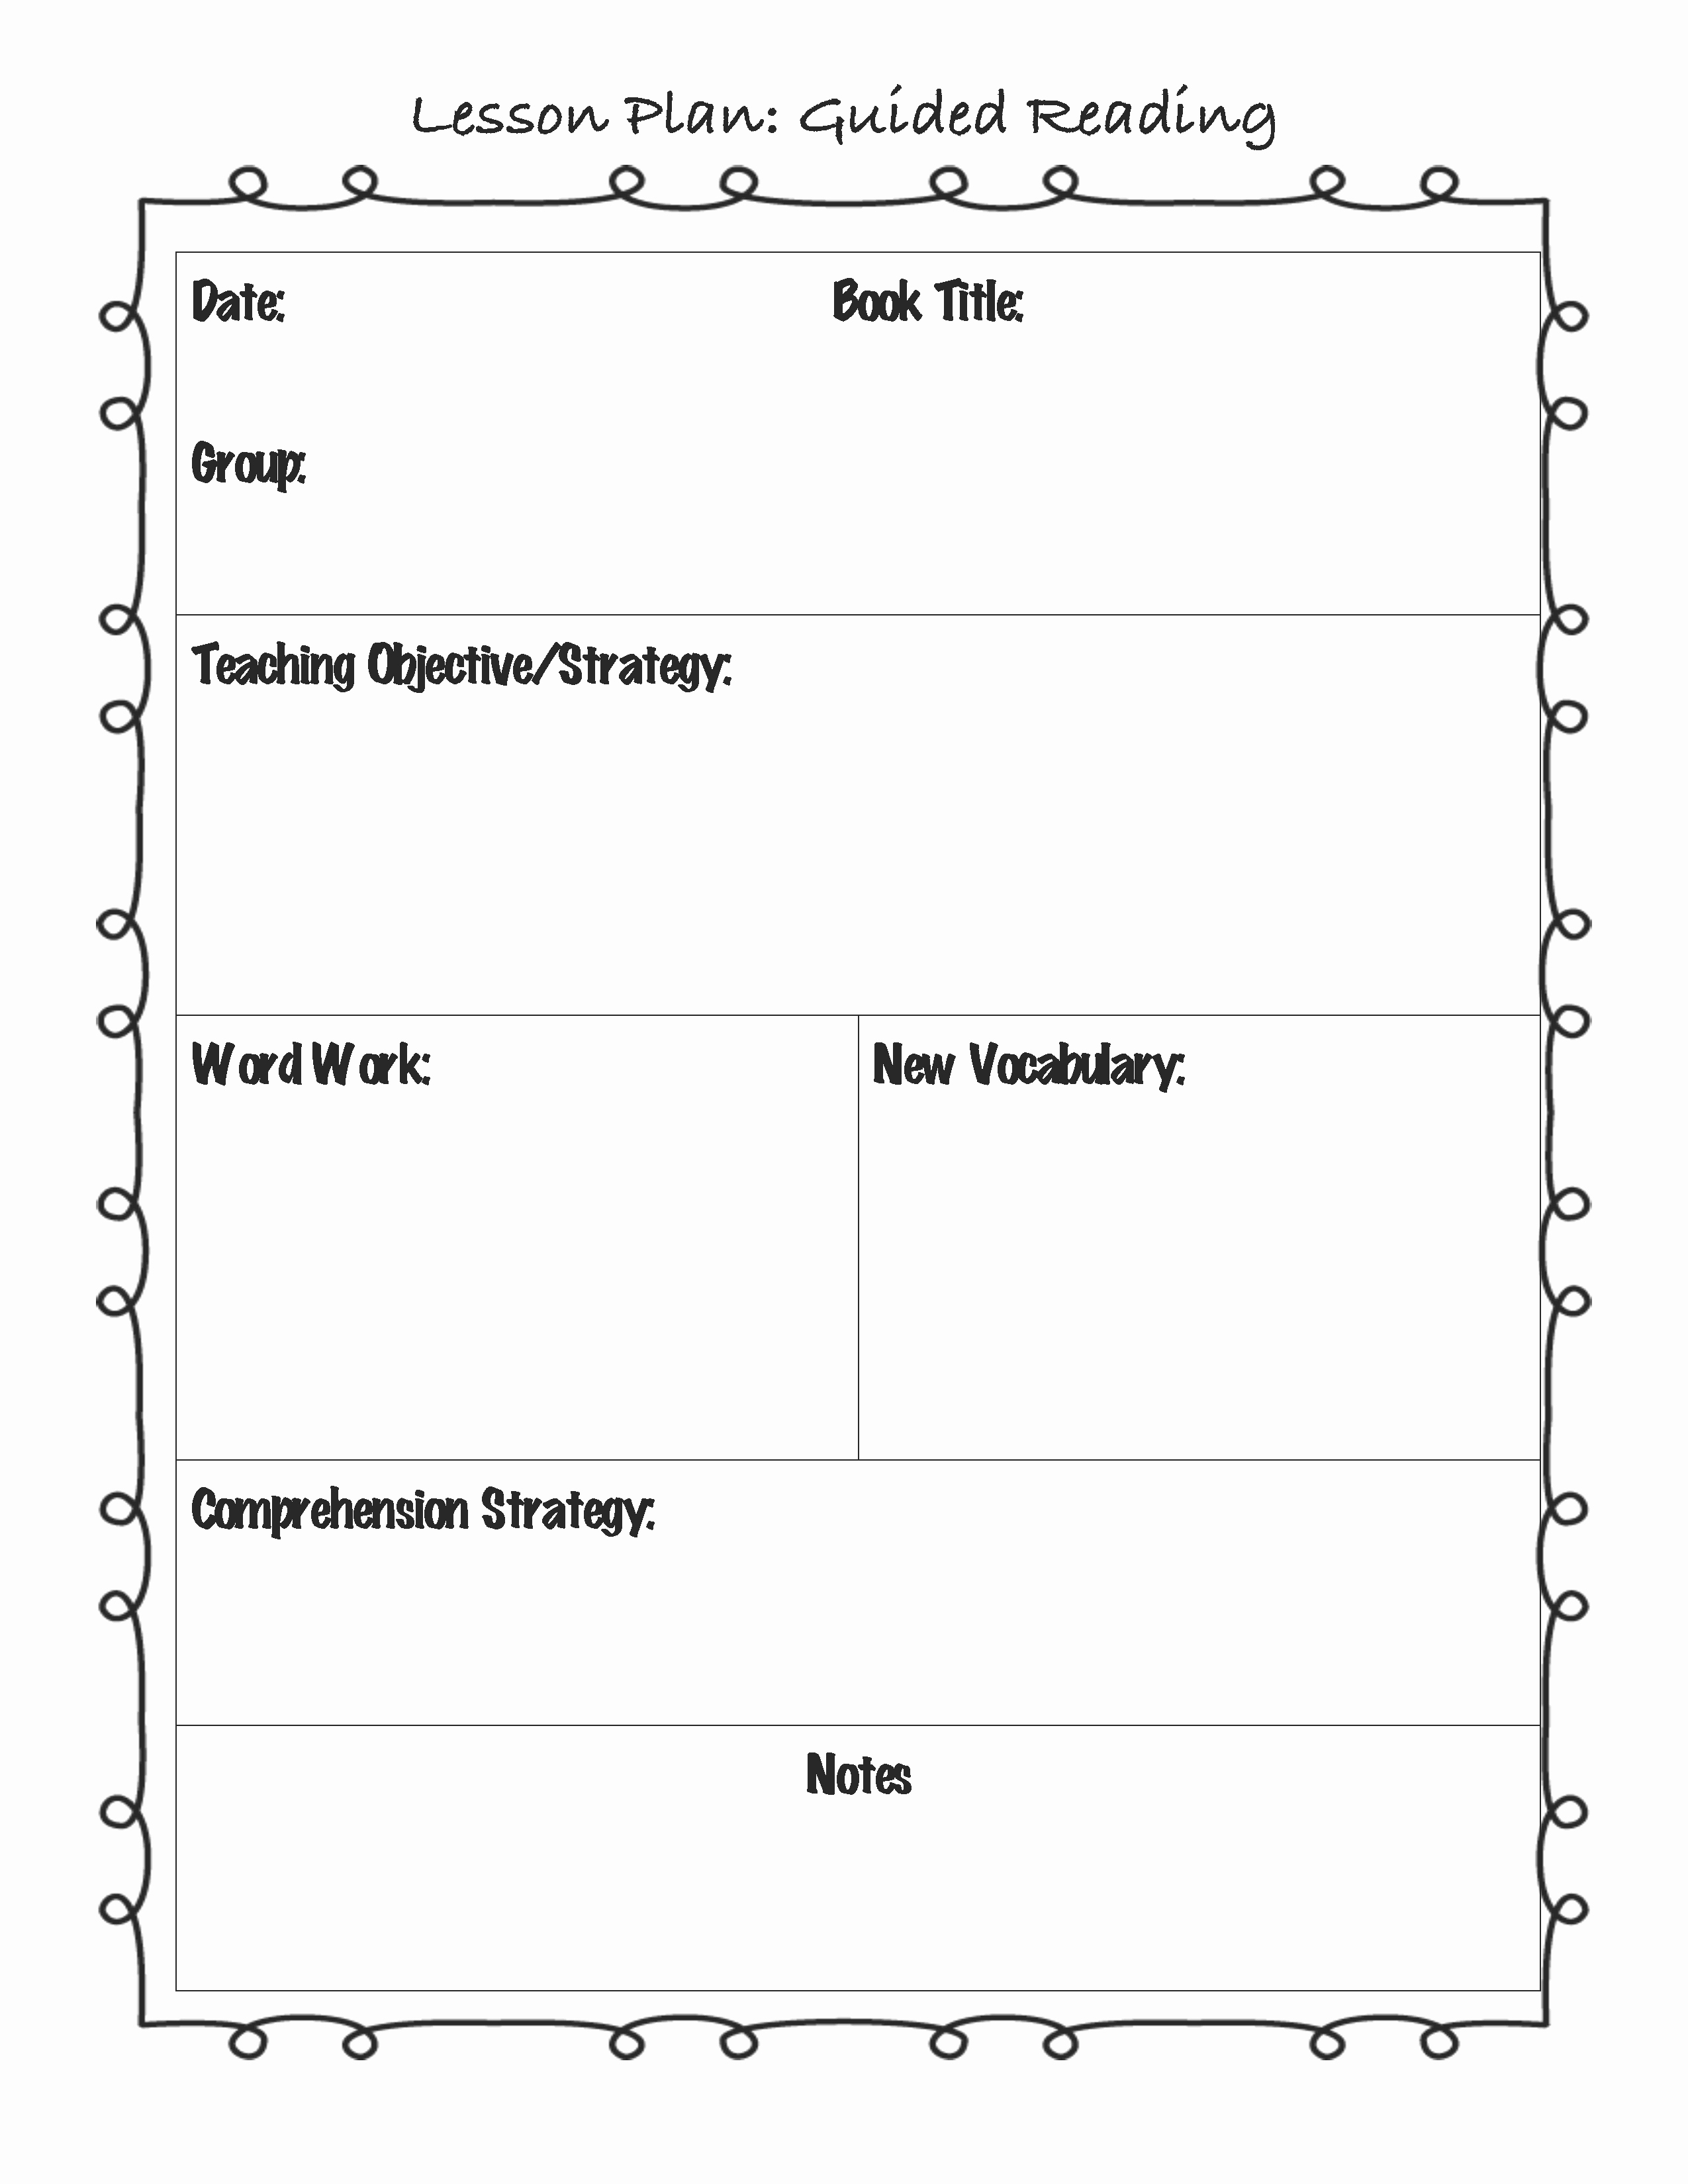 Fundations Lesson Plan Template New Guided Reading Lesson Plan Template